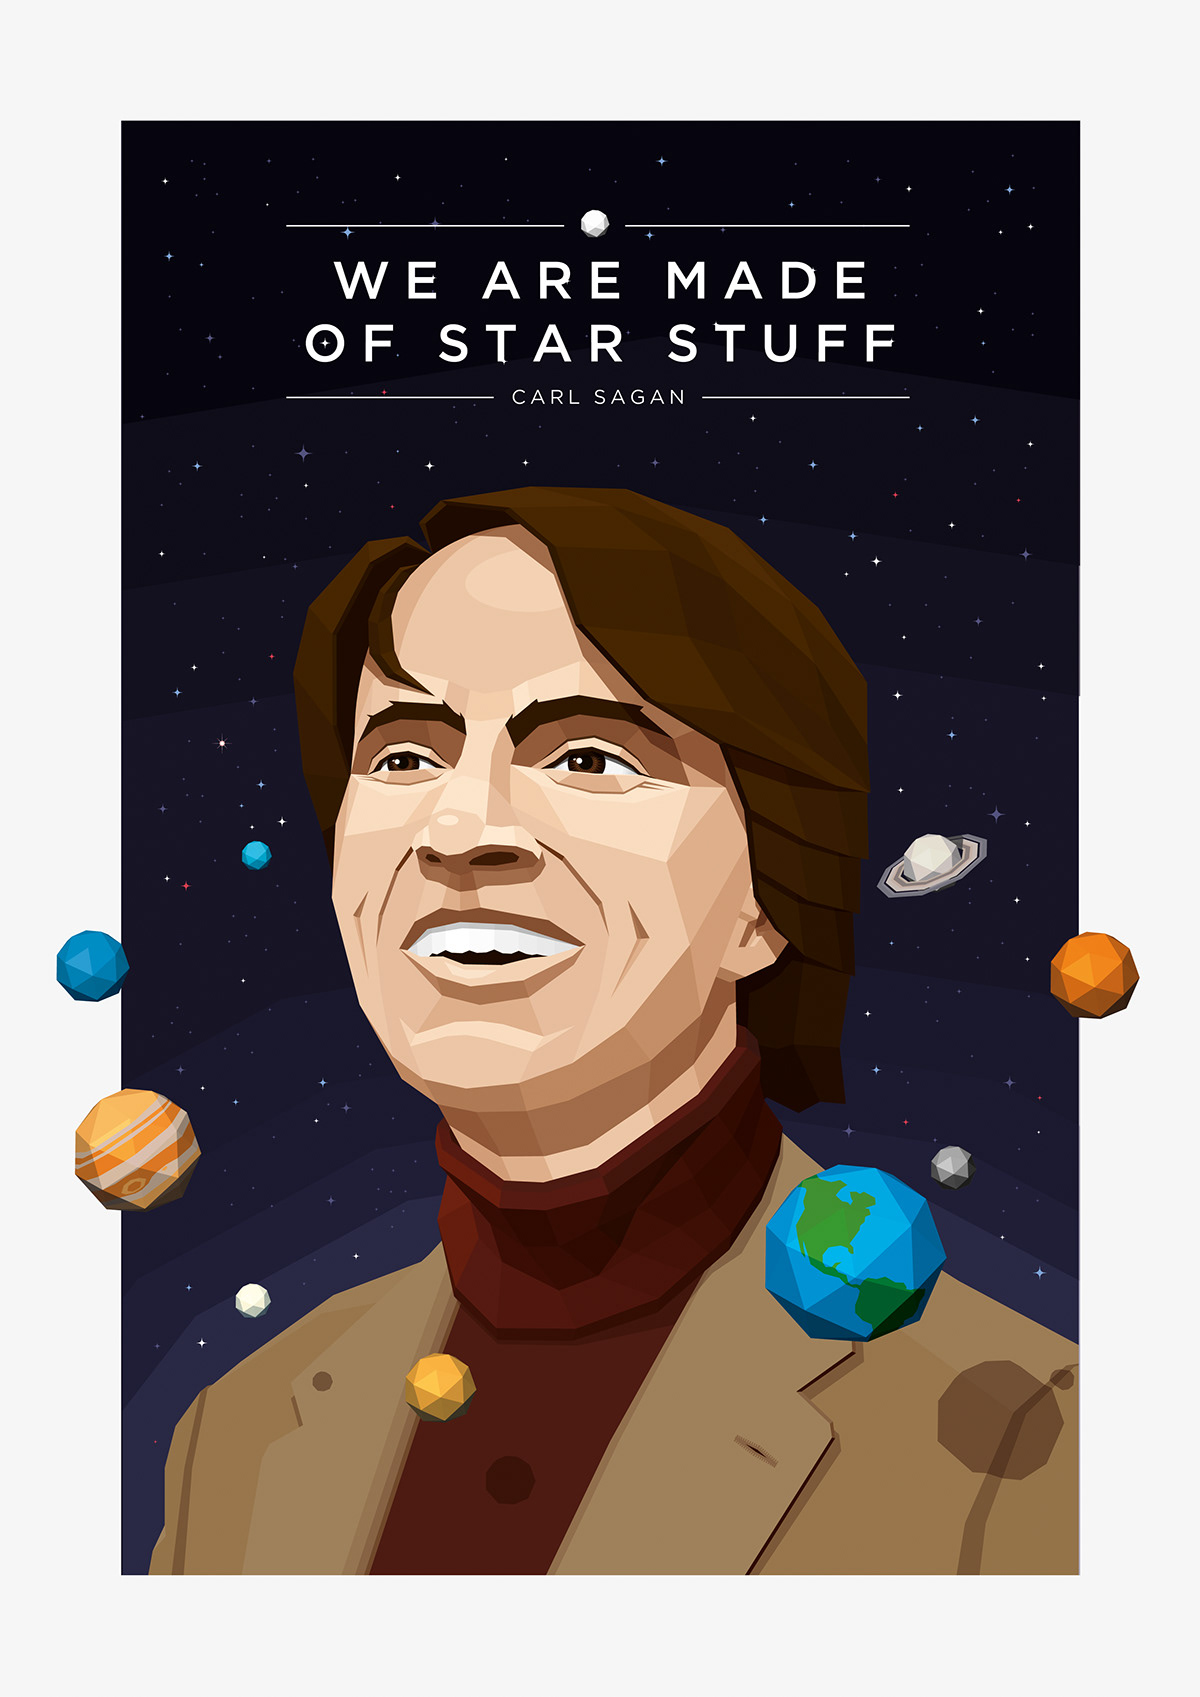 carl sagan portrait quote Space  star Stuff astronomer cosmos planet solar system face